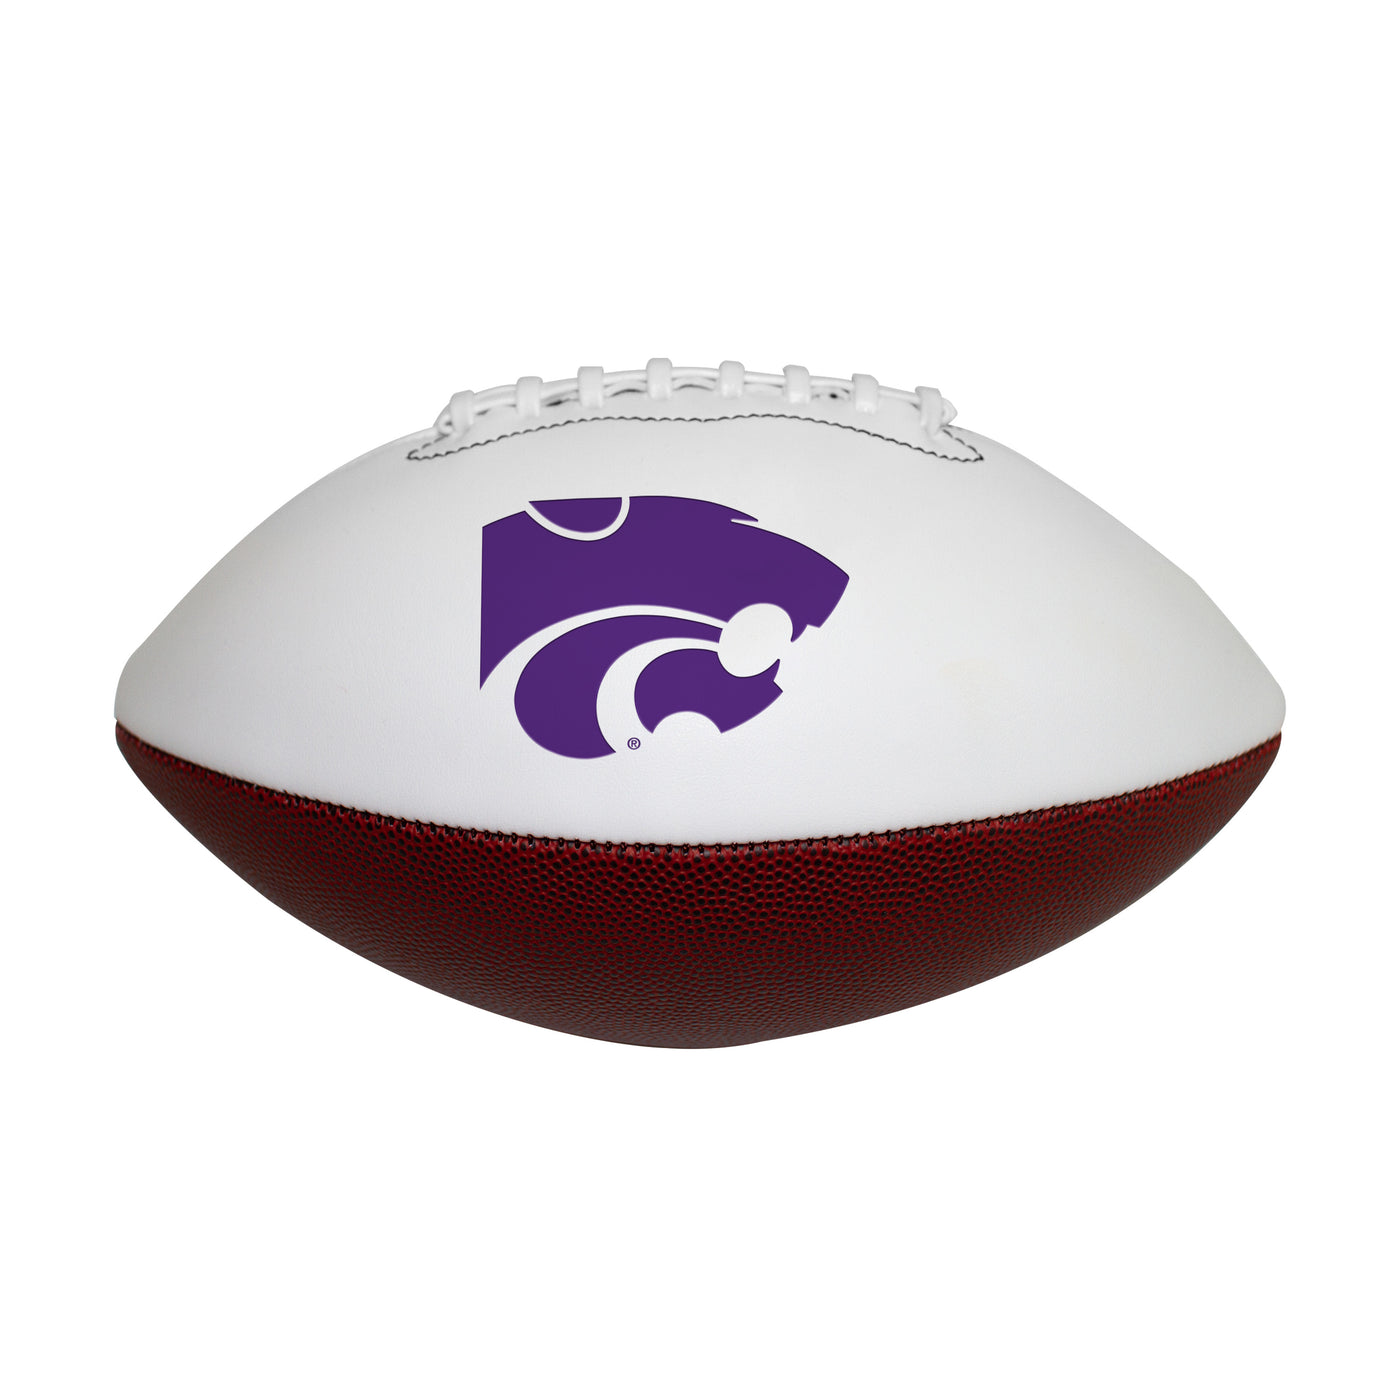 KS State Official-Size Autograph Football